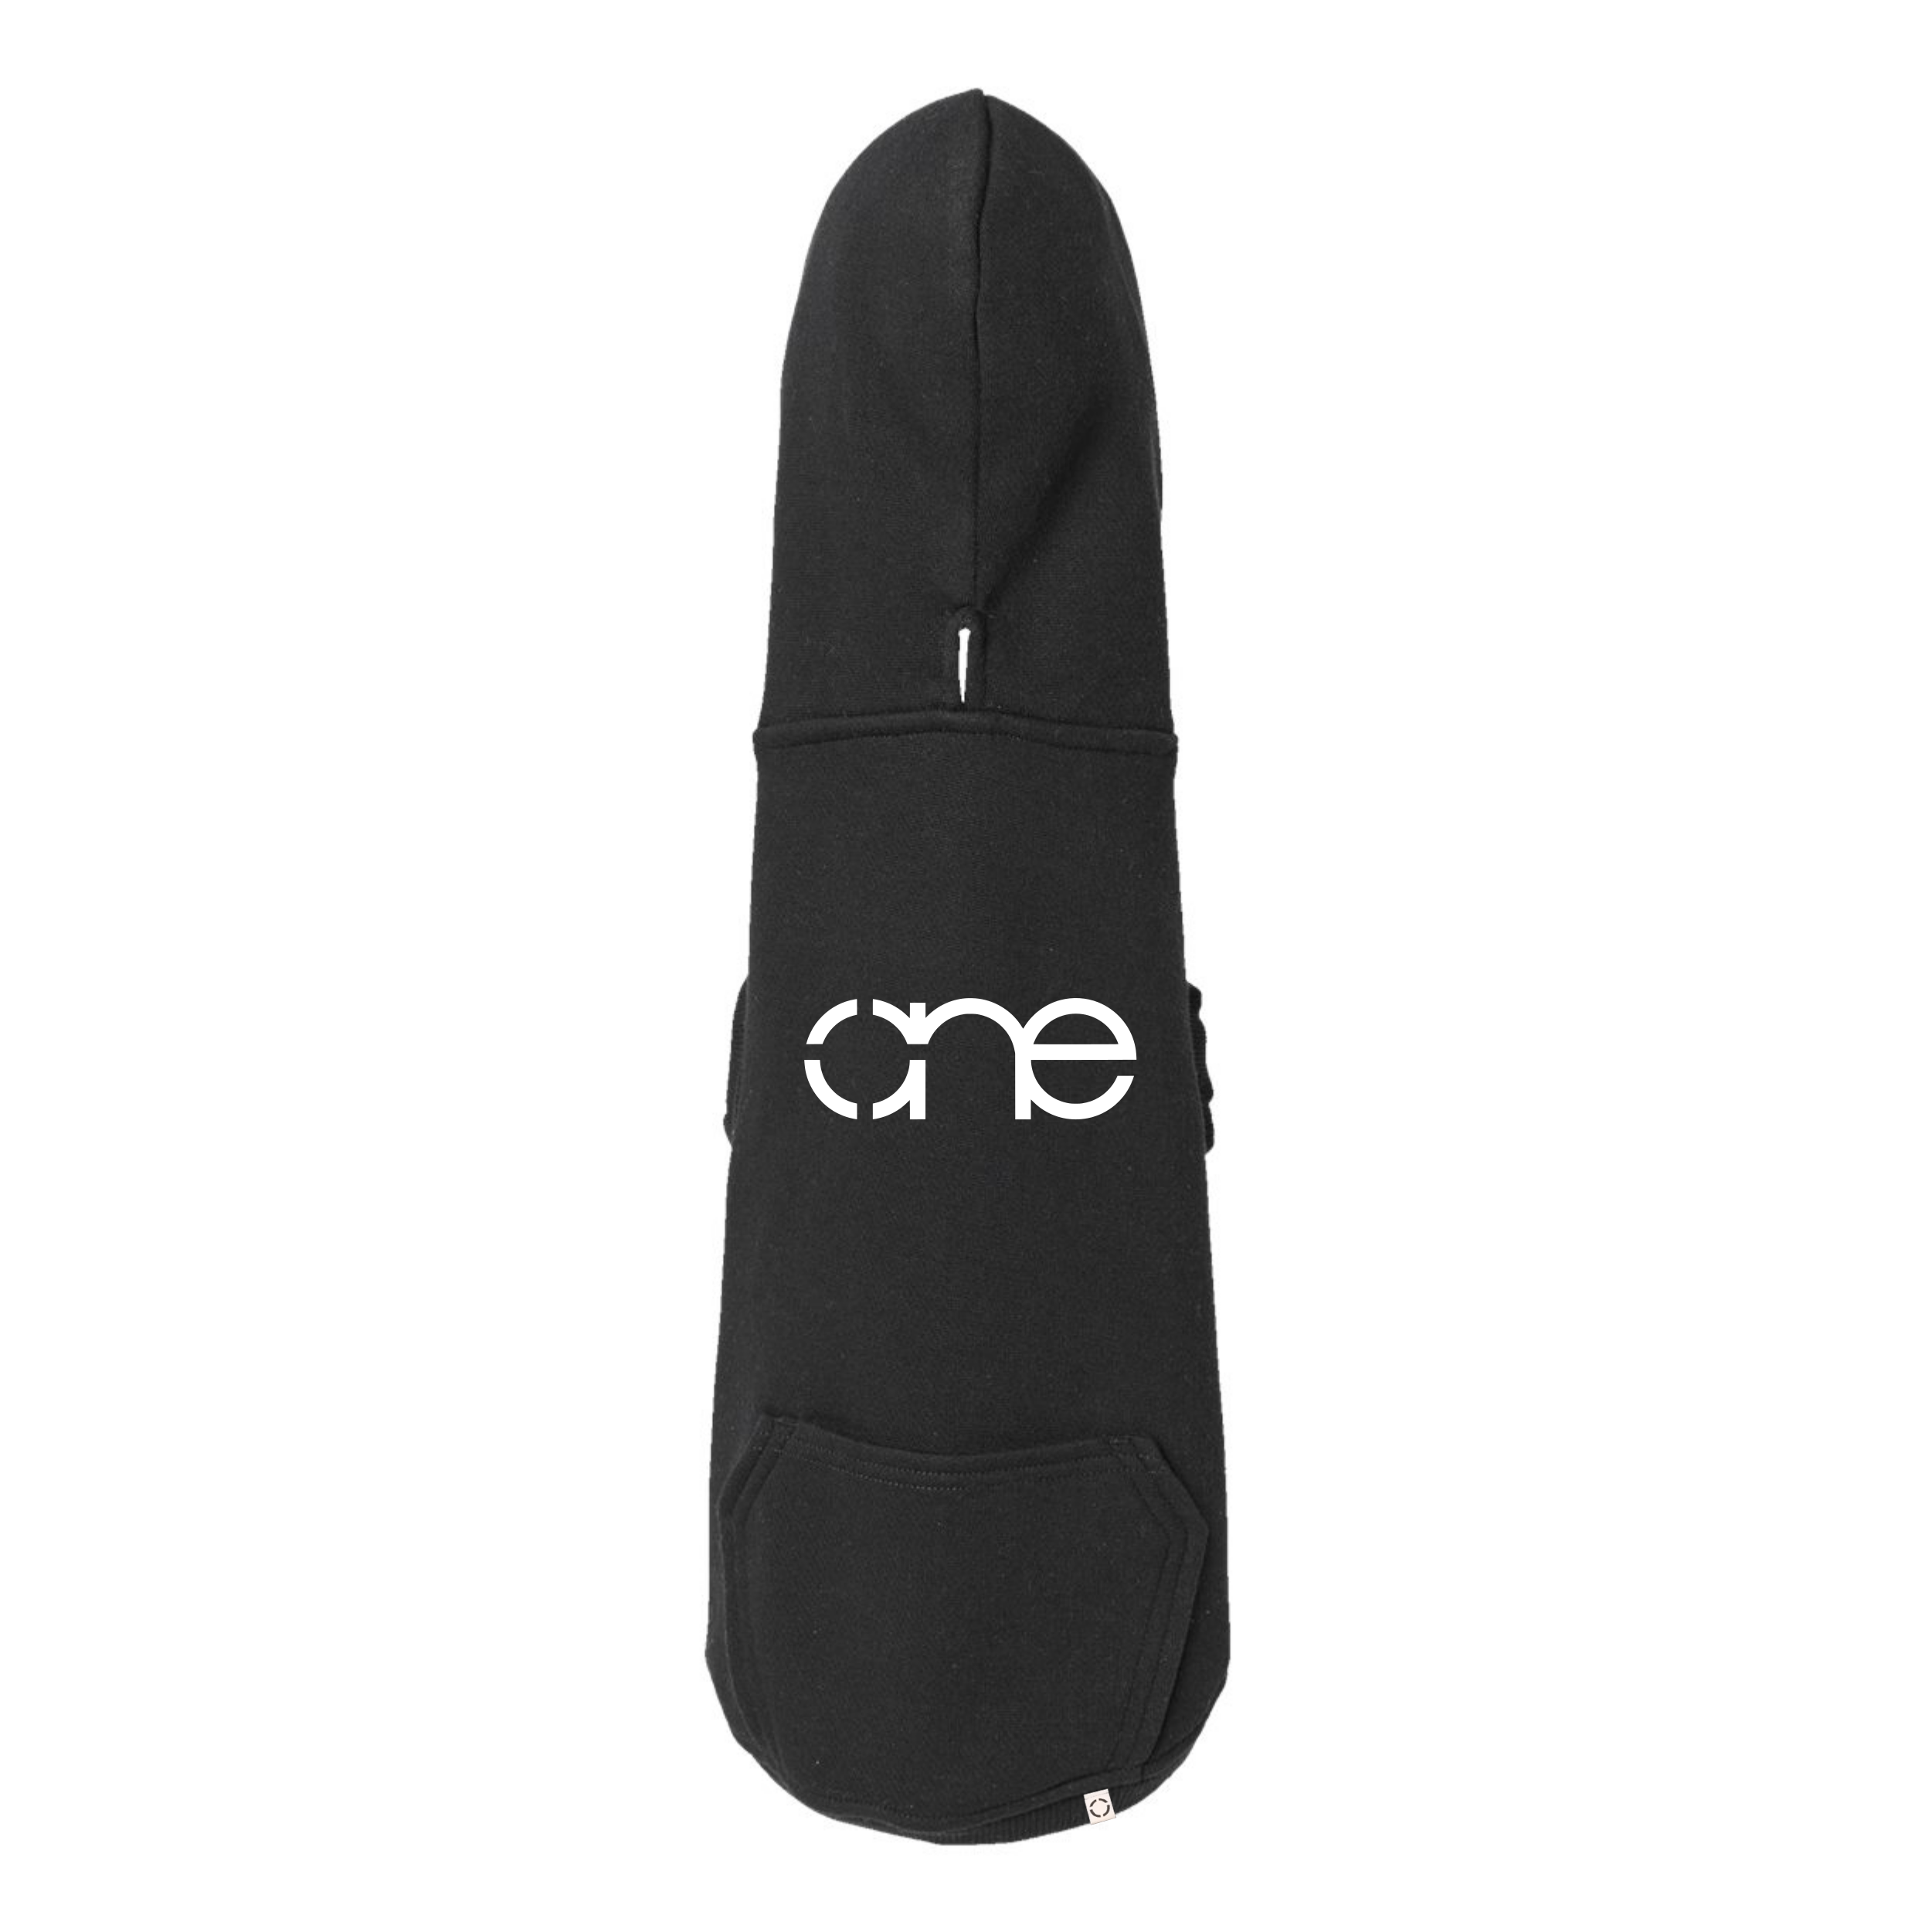 Doggie 3-End Fleece Hoodie in black, with white “One” logo, back view.